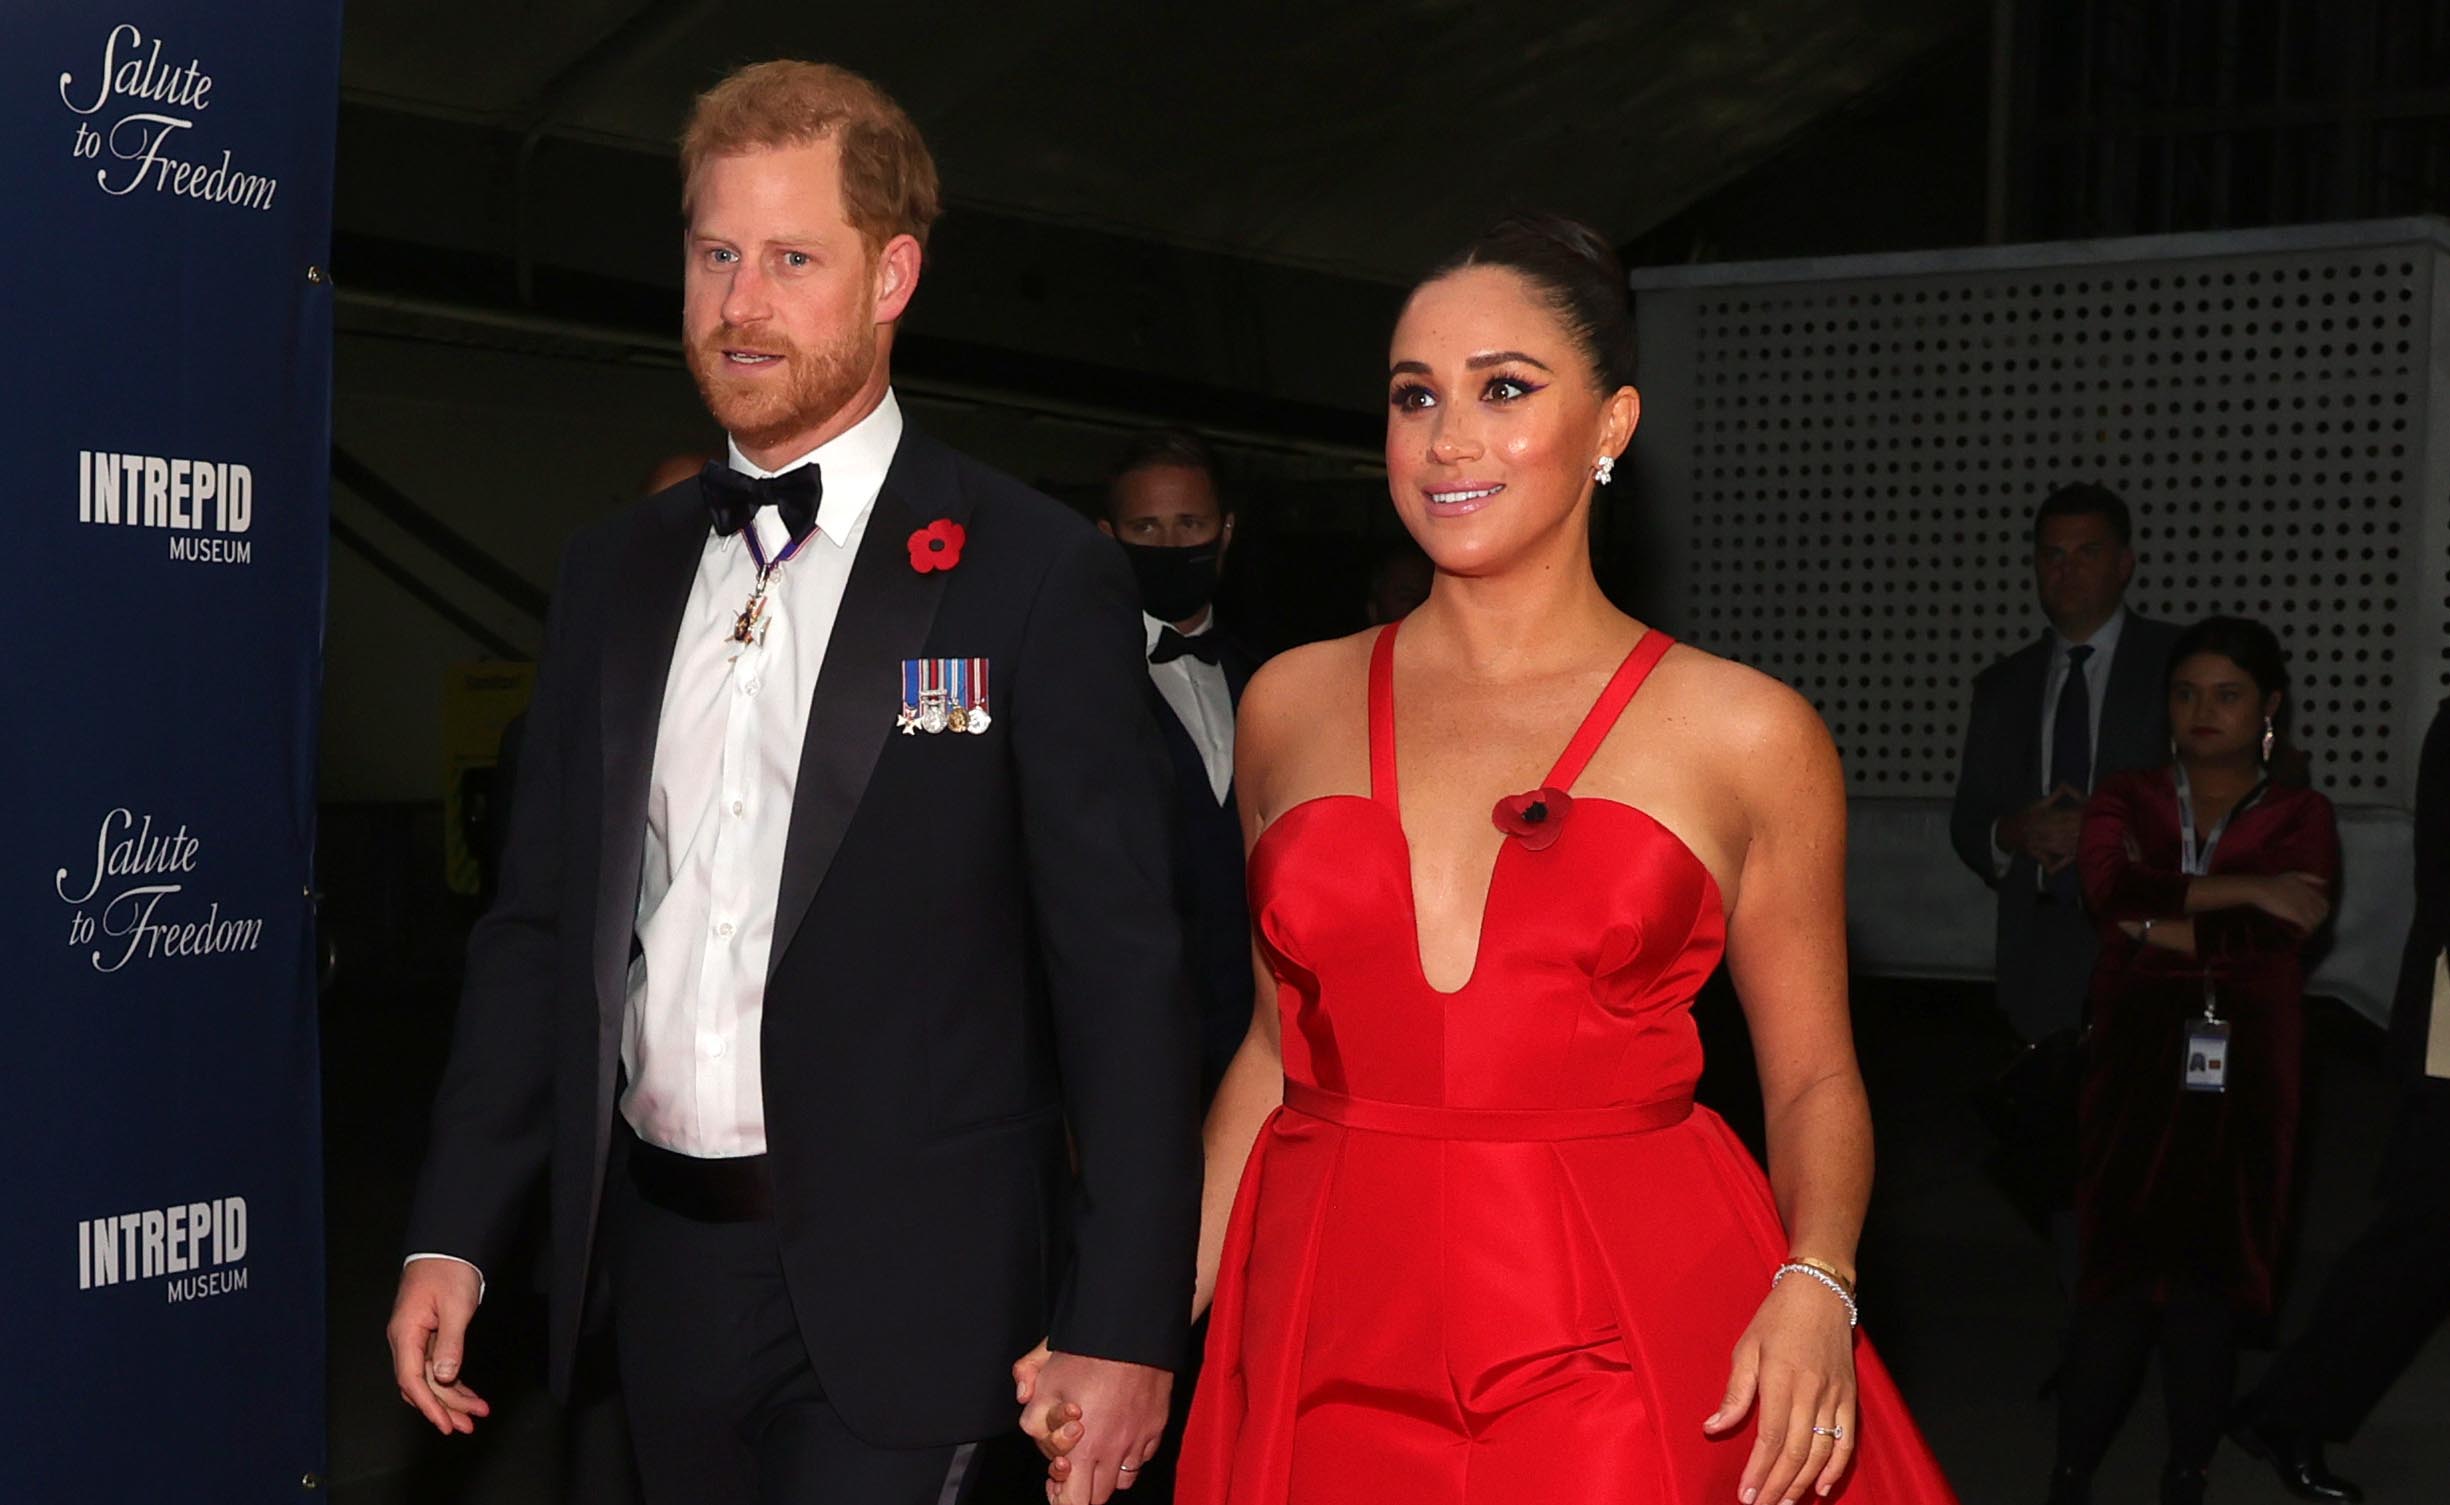 Where will we see Meghan Markle next? At a red carpet event for the rich and famous, insiders claim